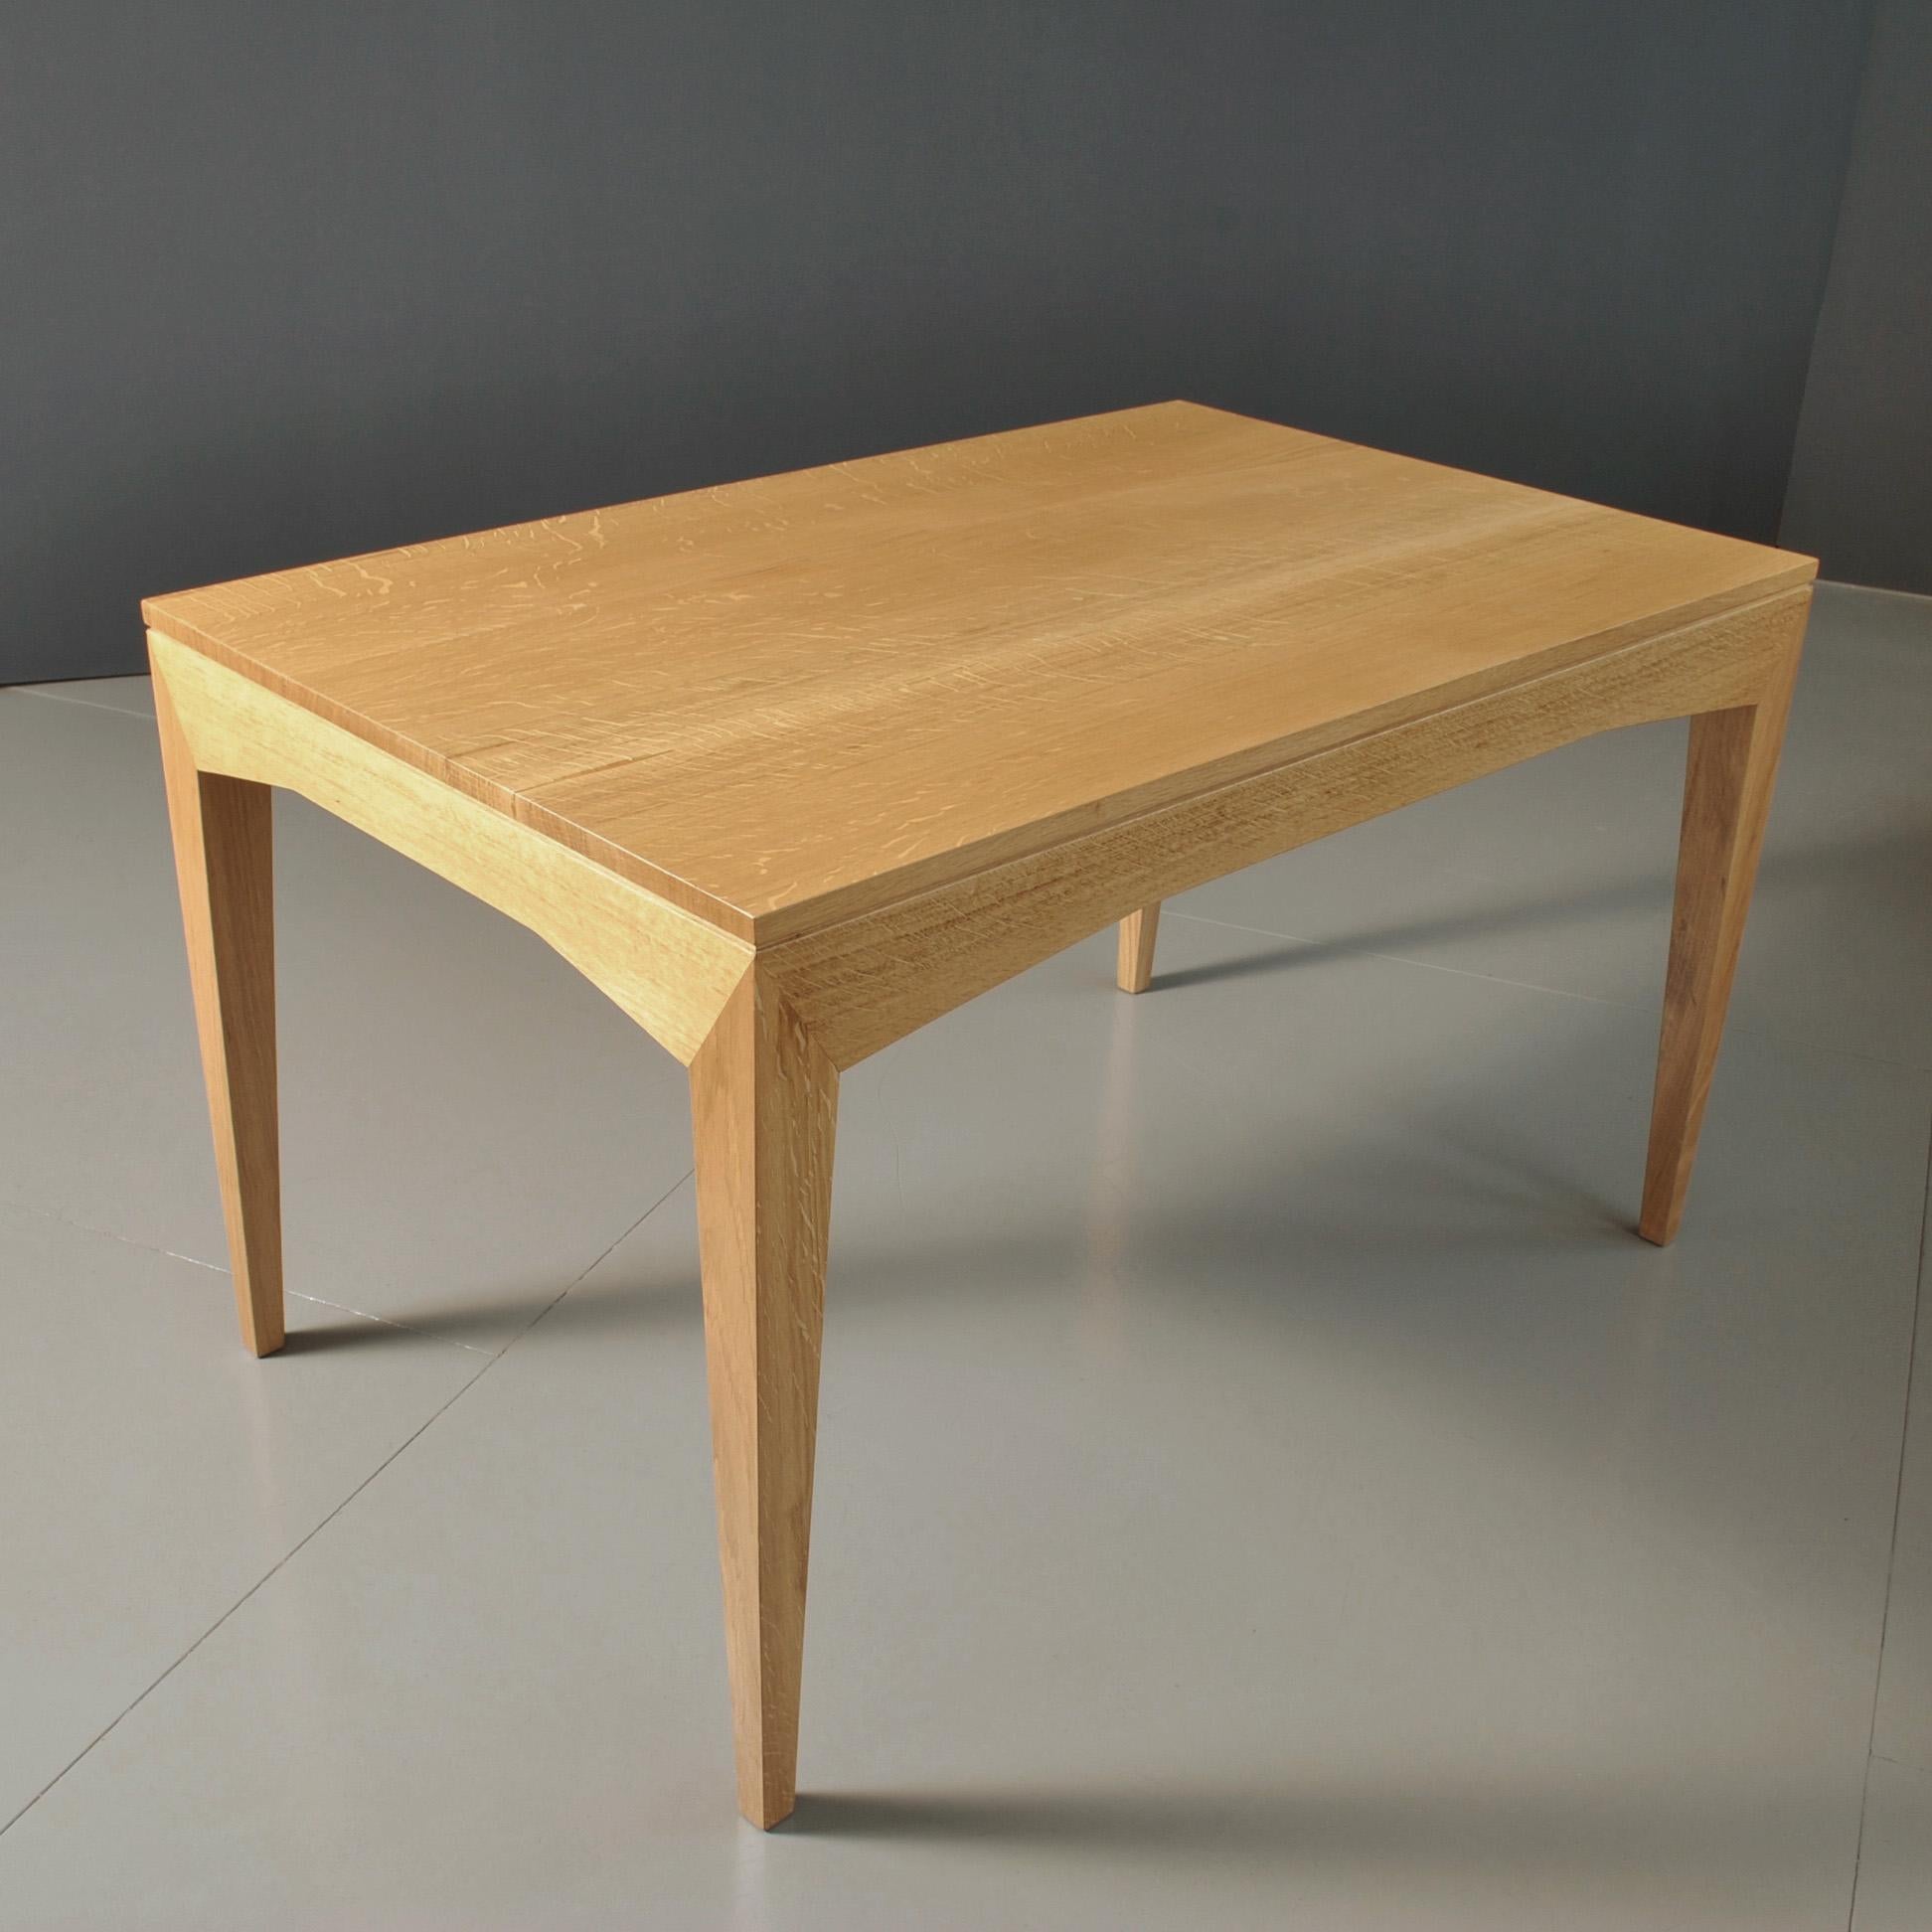 Handcrafted Modernist Desk Table English Oak In New Condition For Sale In London, GB